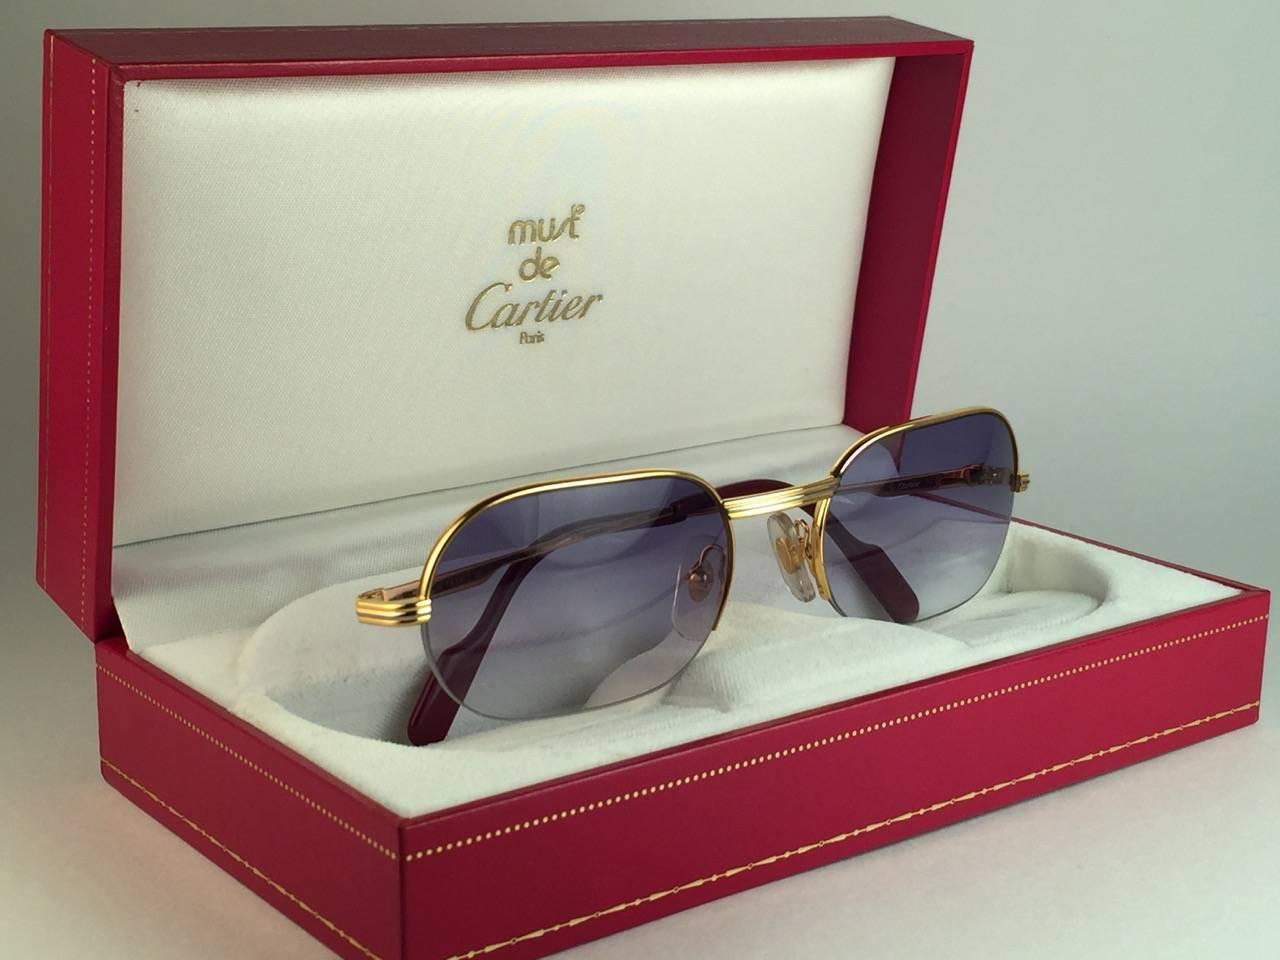 New 1983 Cartier Ascot Vendome Gold 55mm Half Frame with blue gradient (uv protection) lenses. 
Frame is with the front and sides in white and yellow gold heavy 18k plated accents. All hallmarks. Burgundy with Cartier gold signs on the earpaddles.